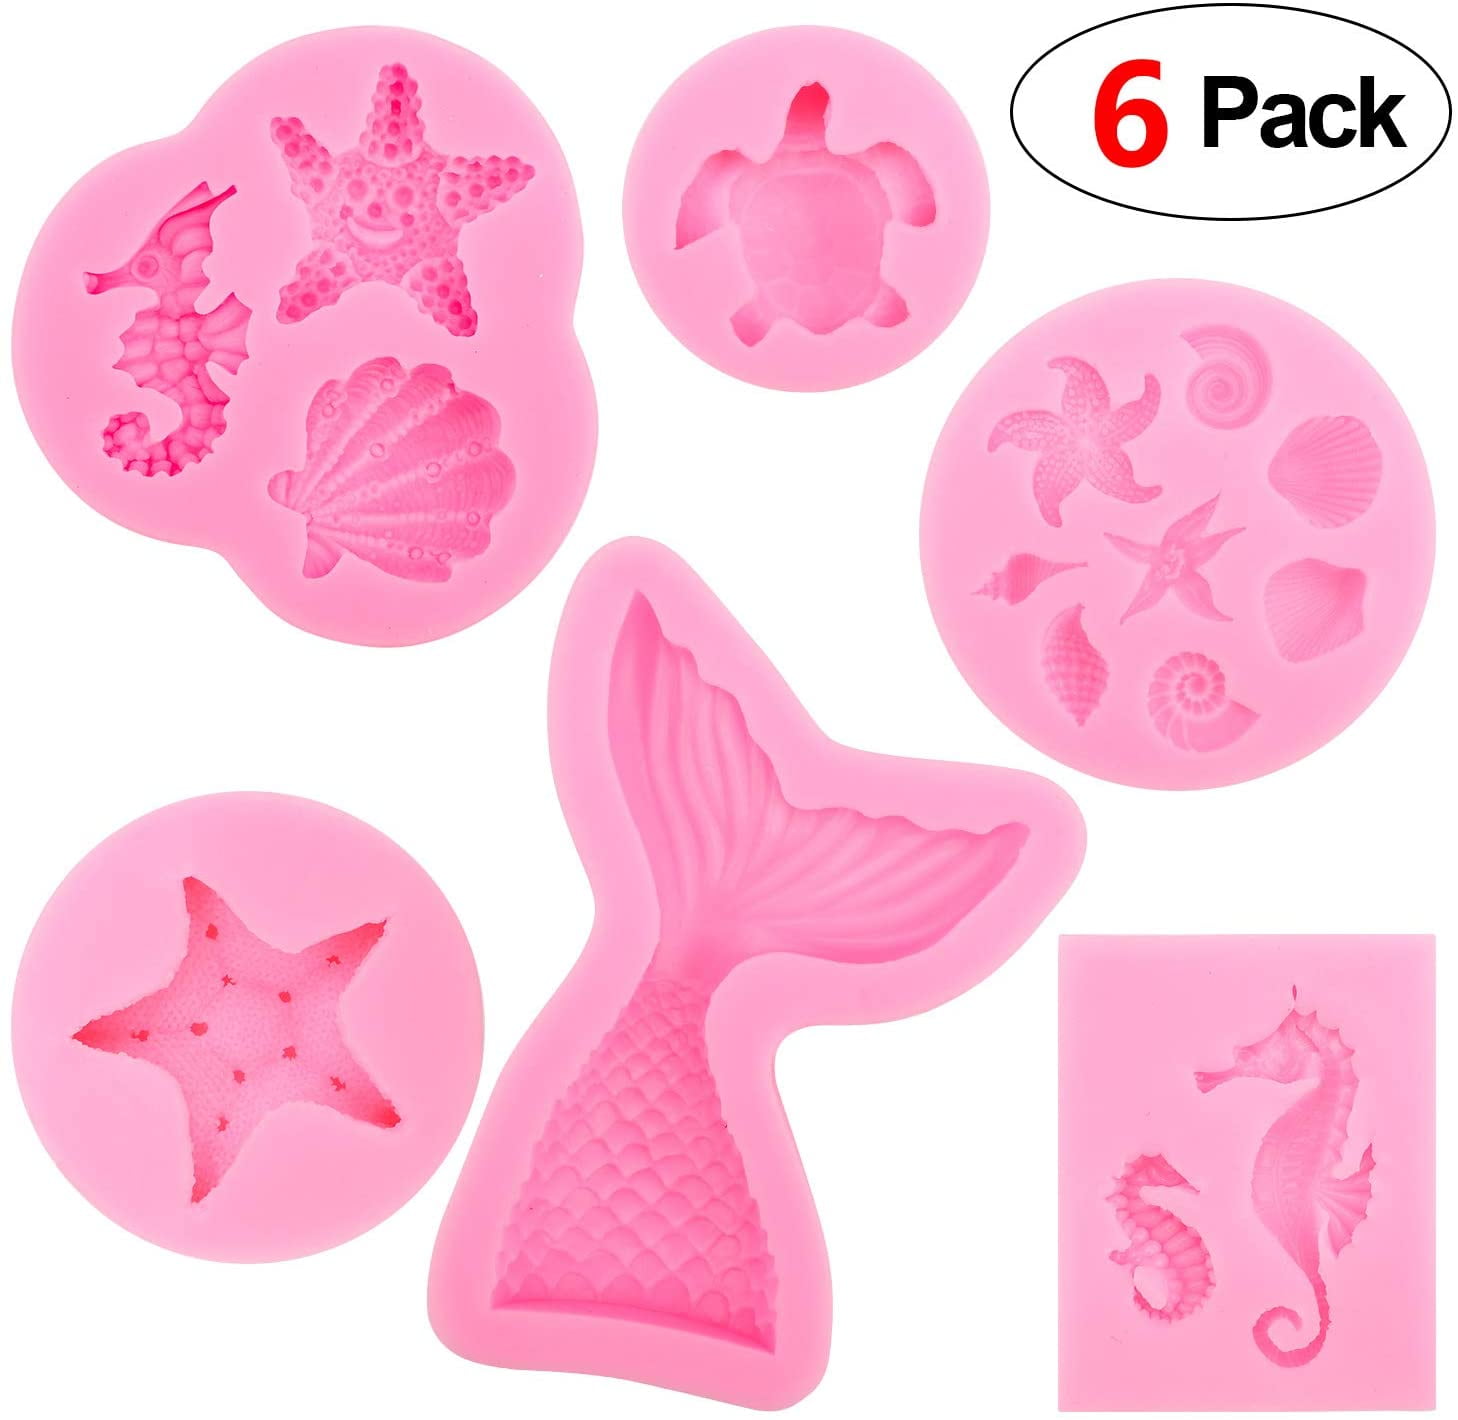 Mermaid tail Silicone mold fondant mold cake decorating tool chocolate mouldHC 